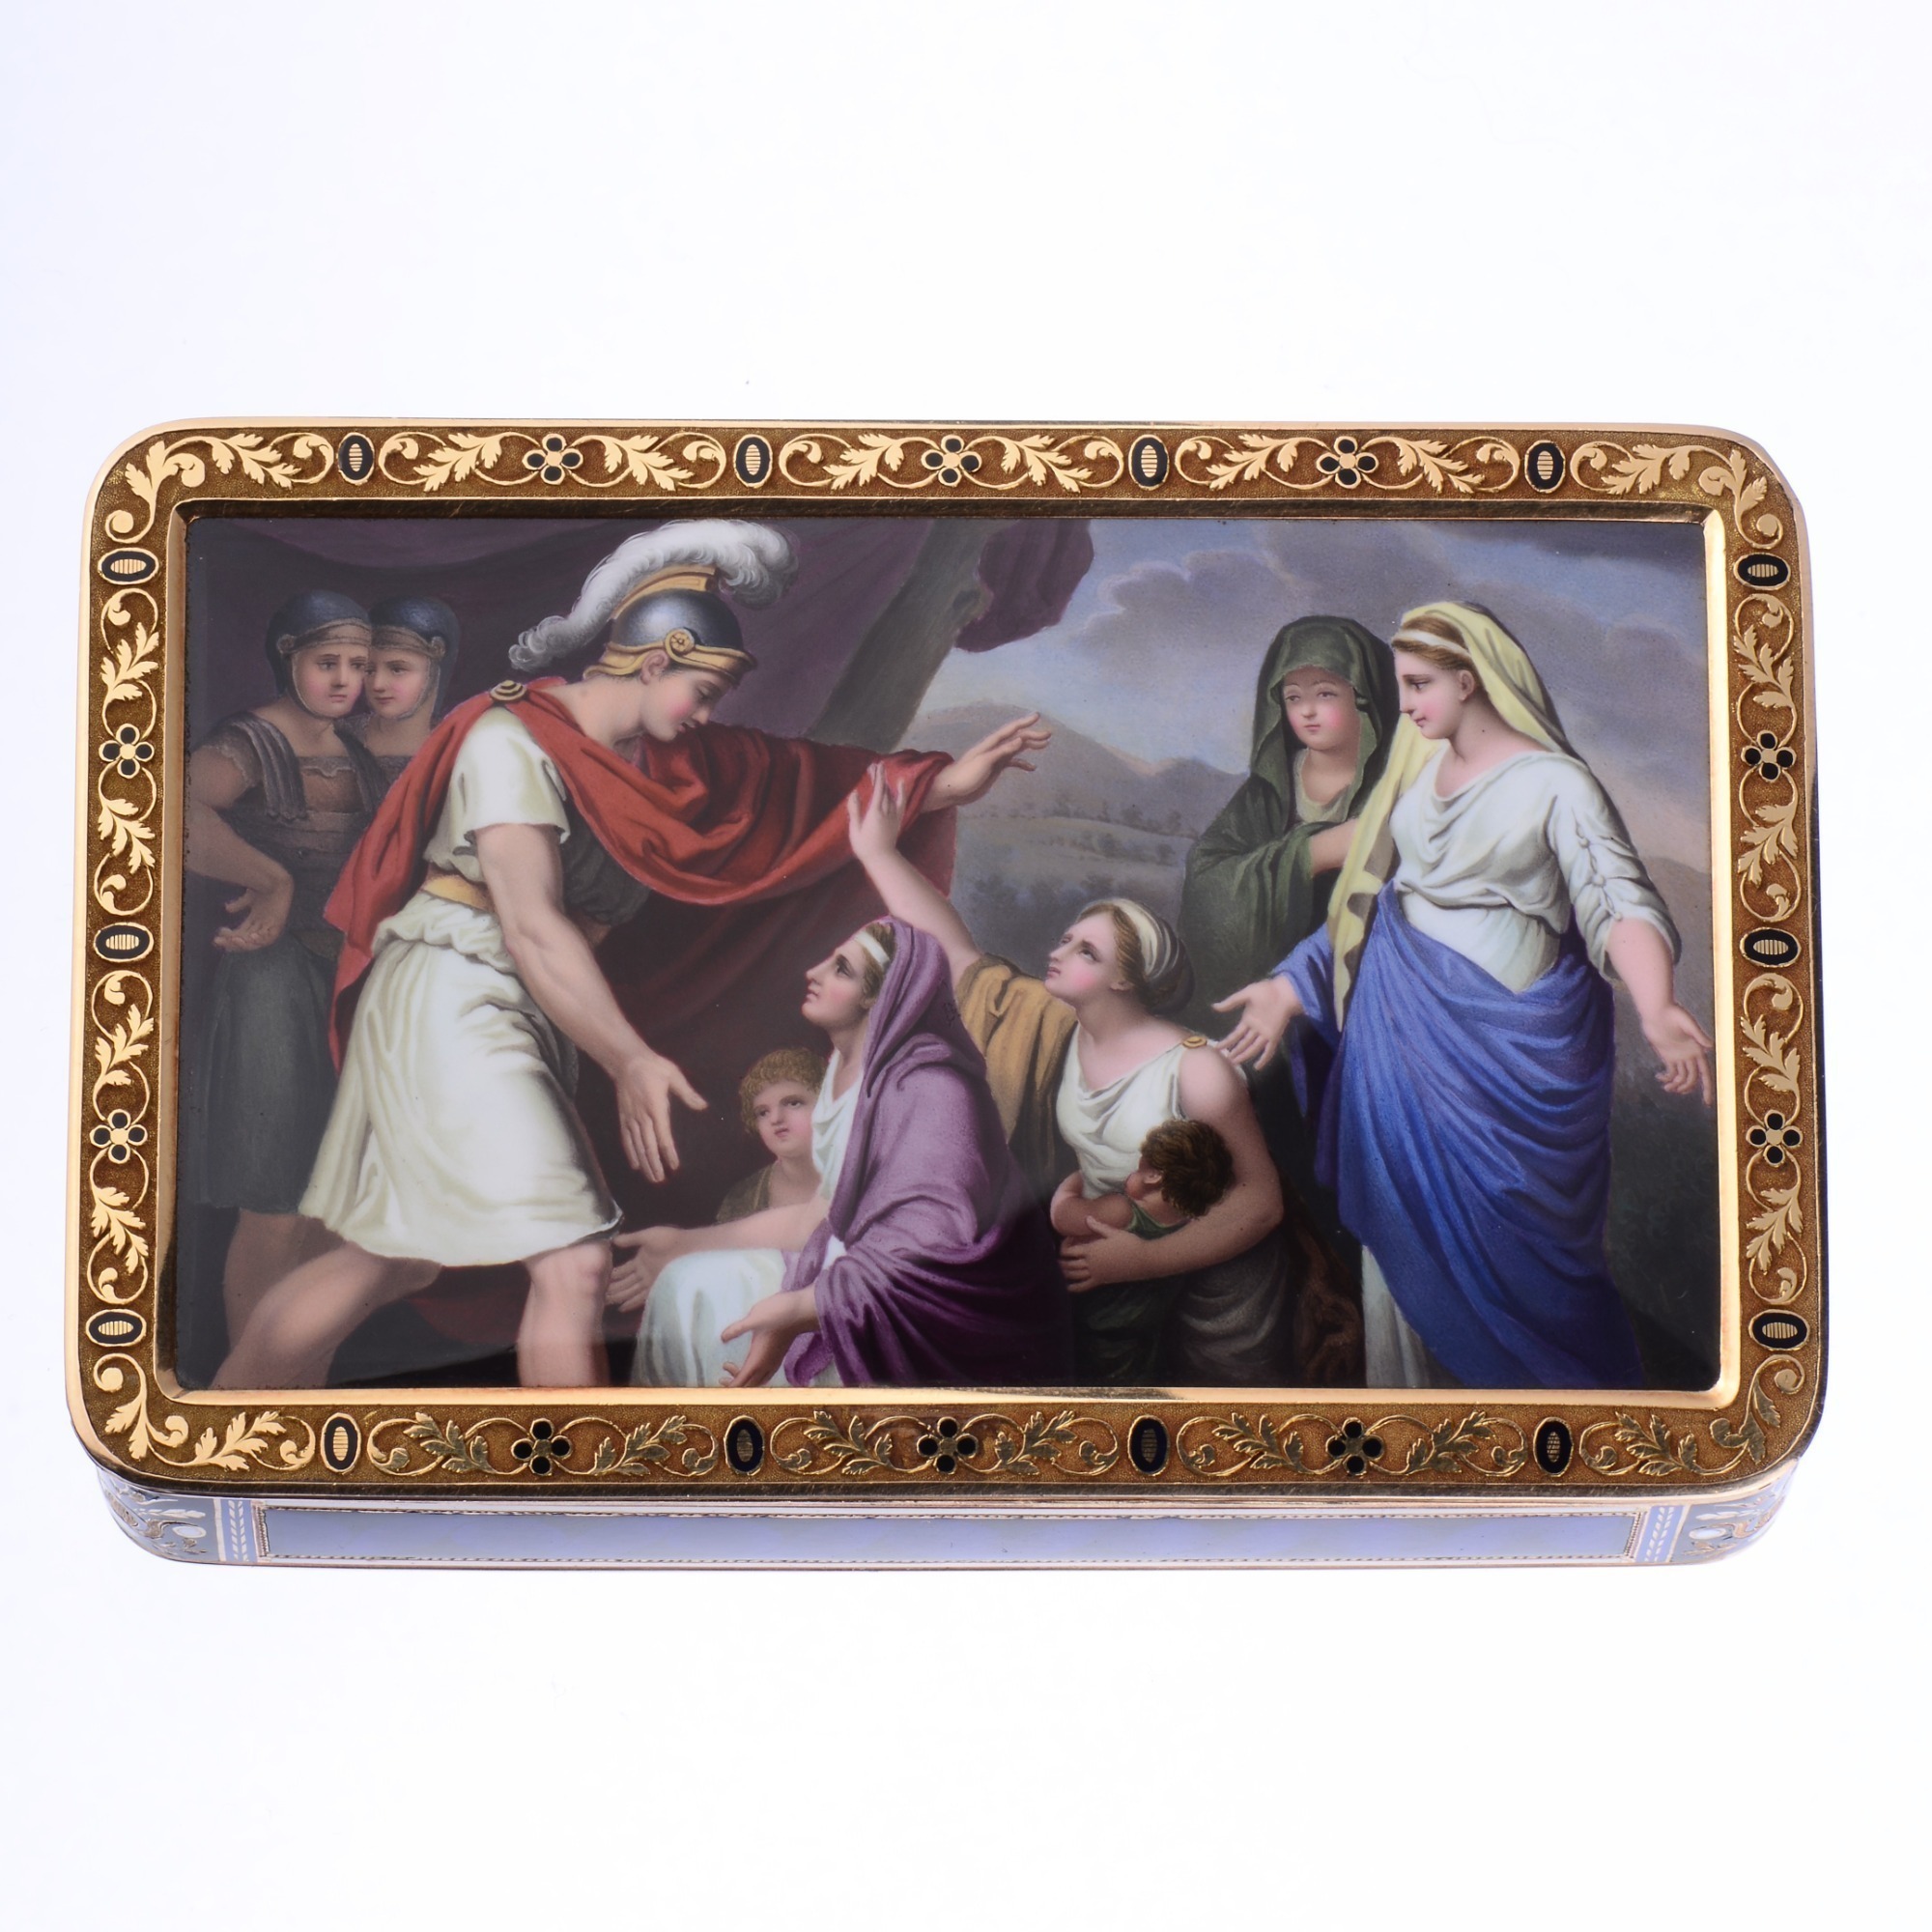 Exceptional And Fine Swiss 18K Gold Enamel Box Circa 1810